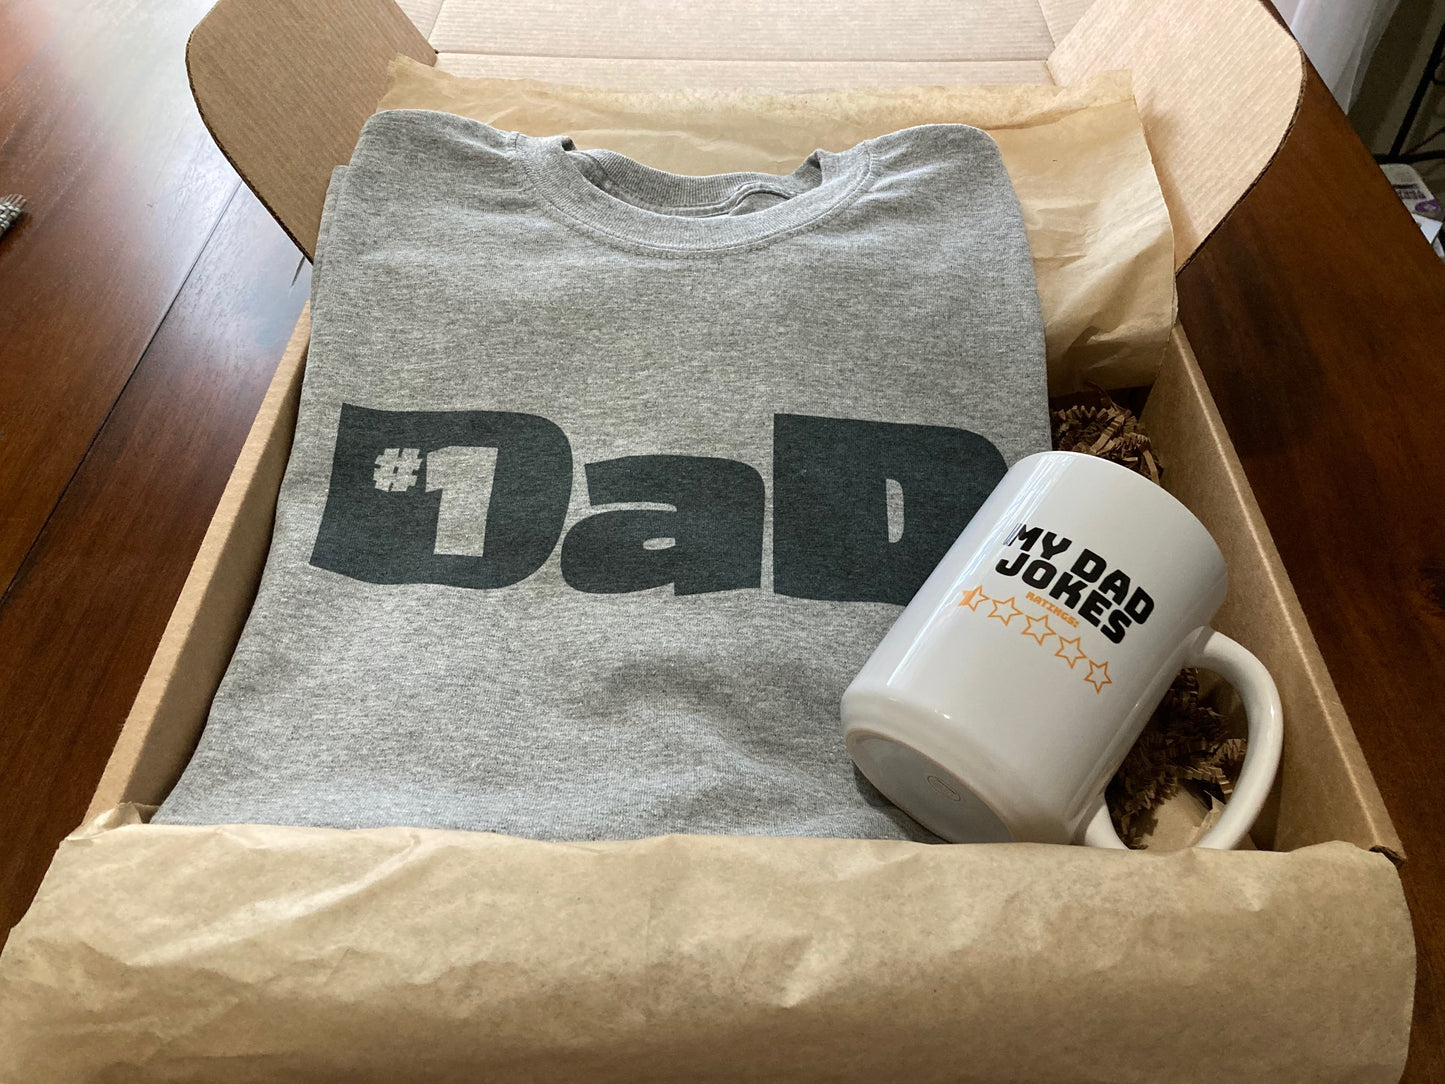 Father's Day Dad Gift Box